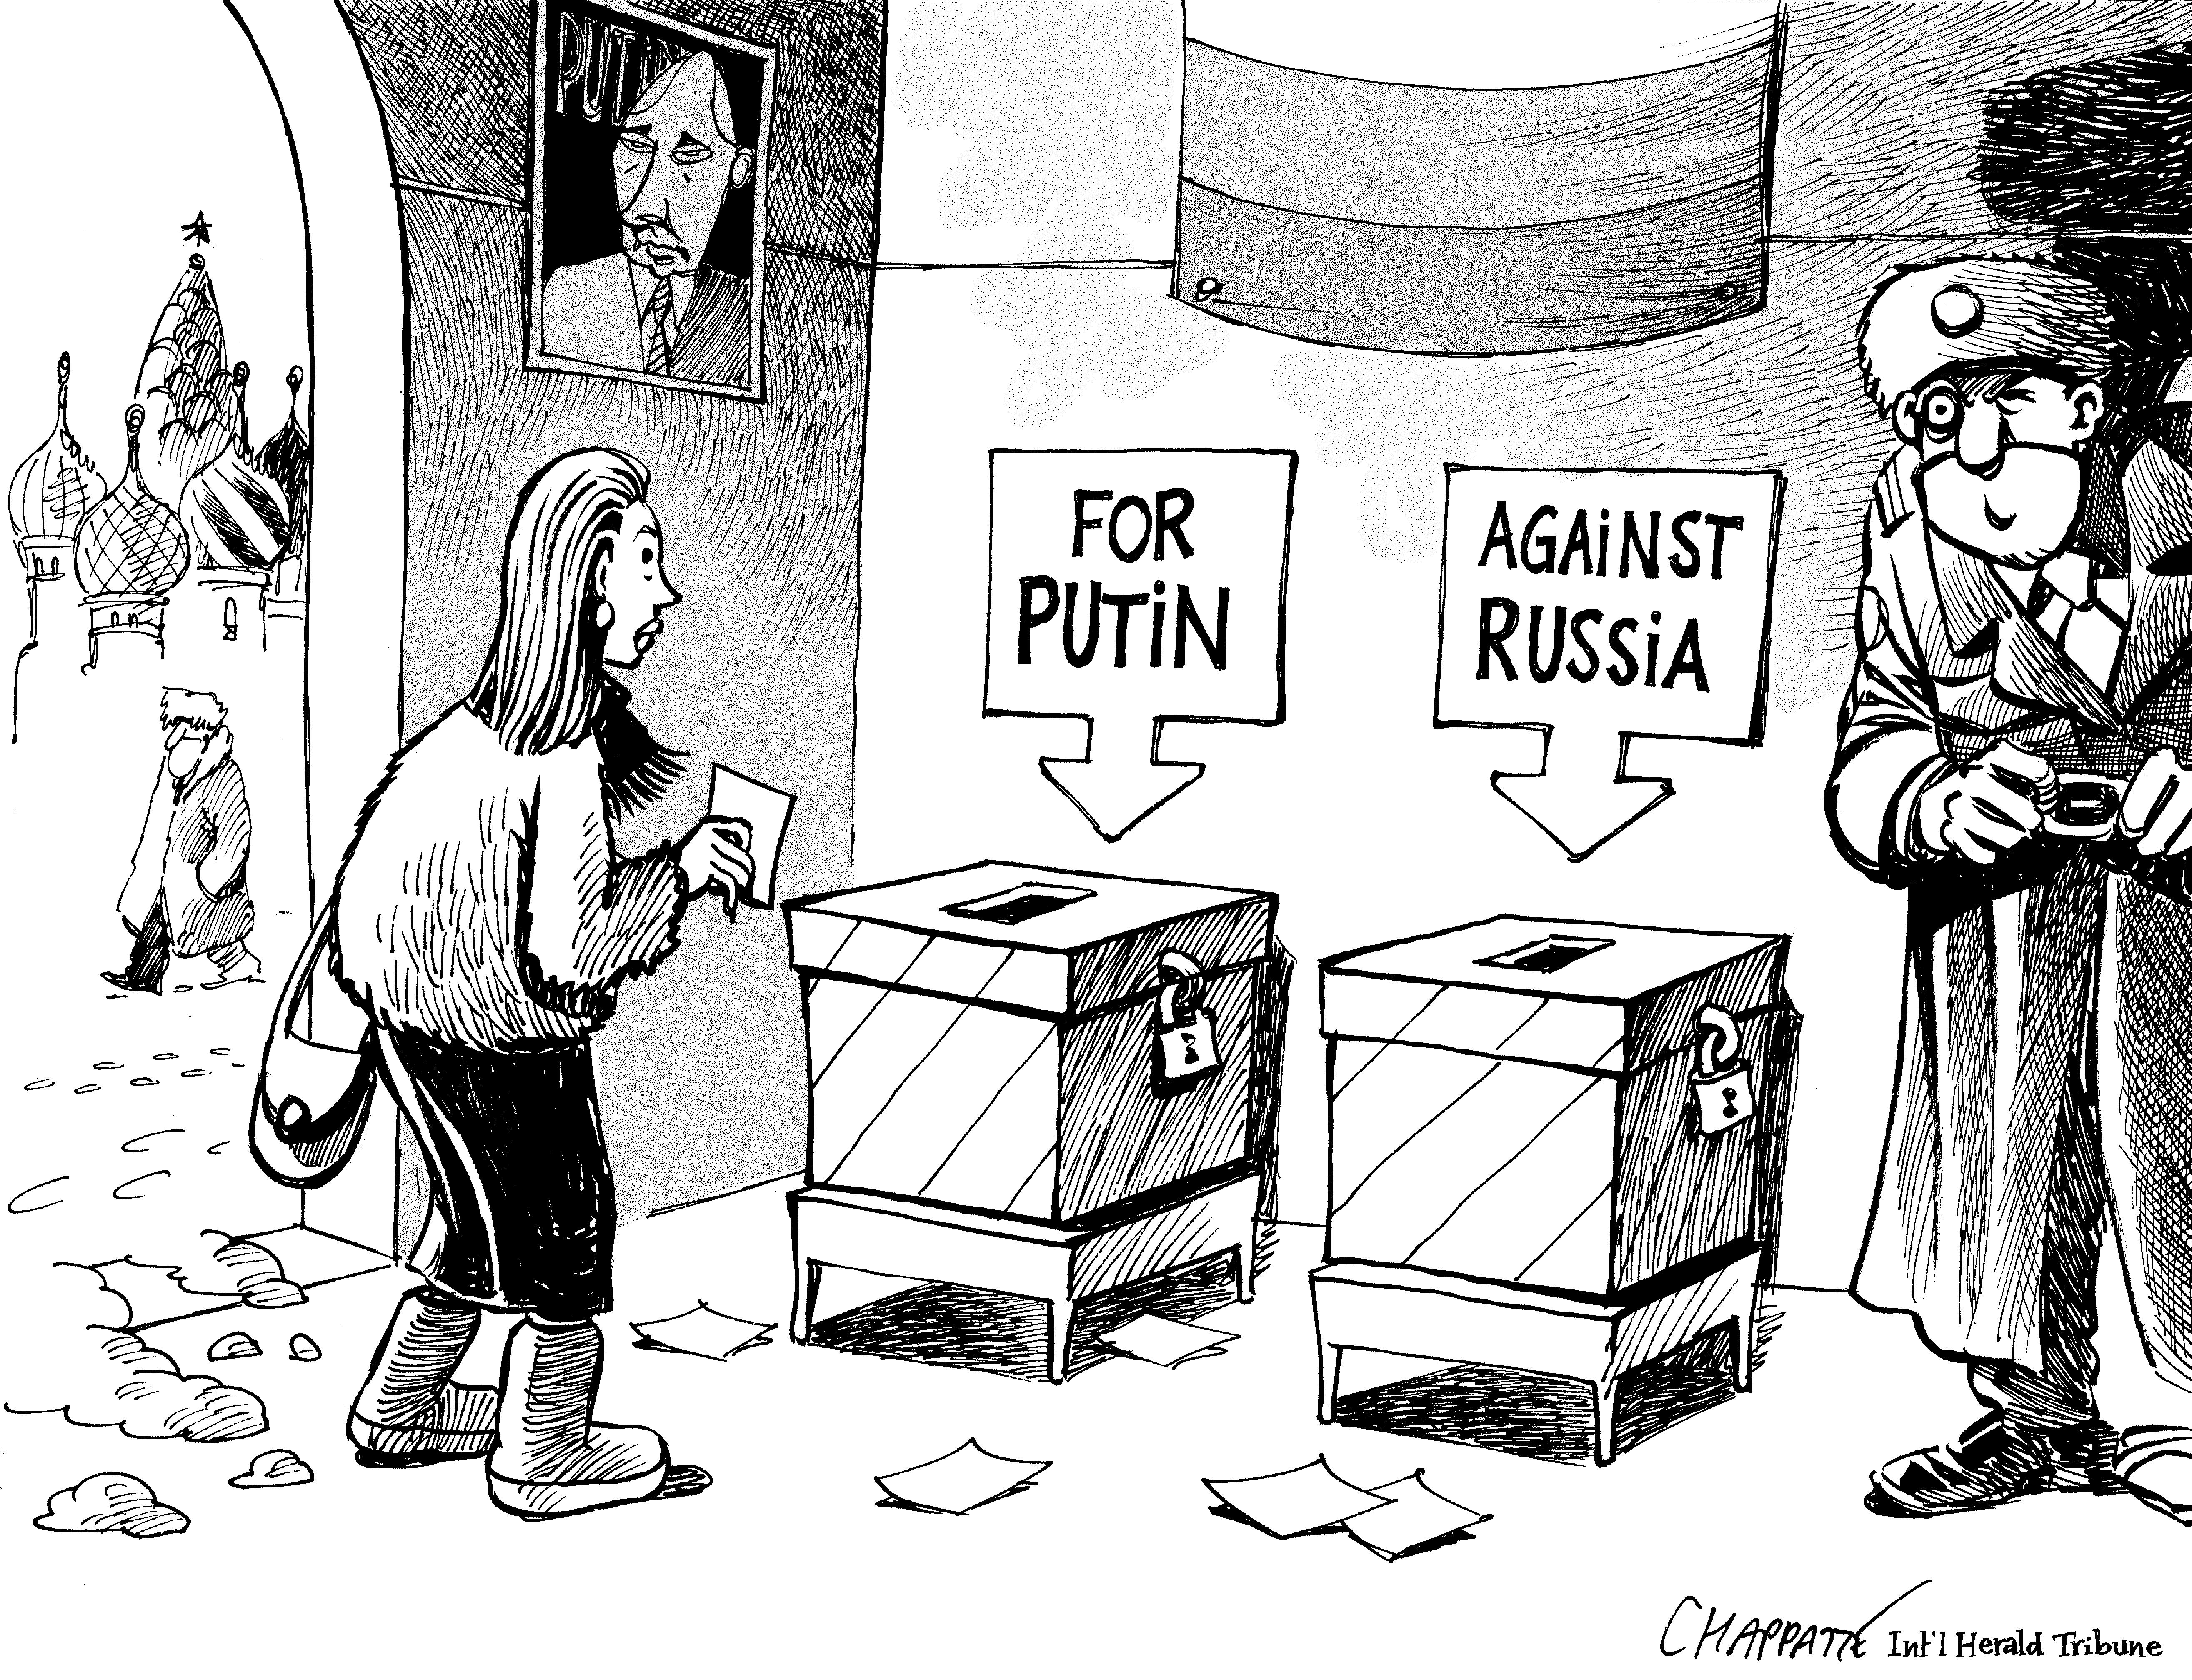 Elections in Russia